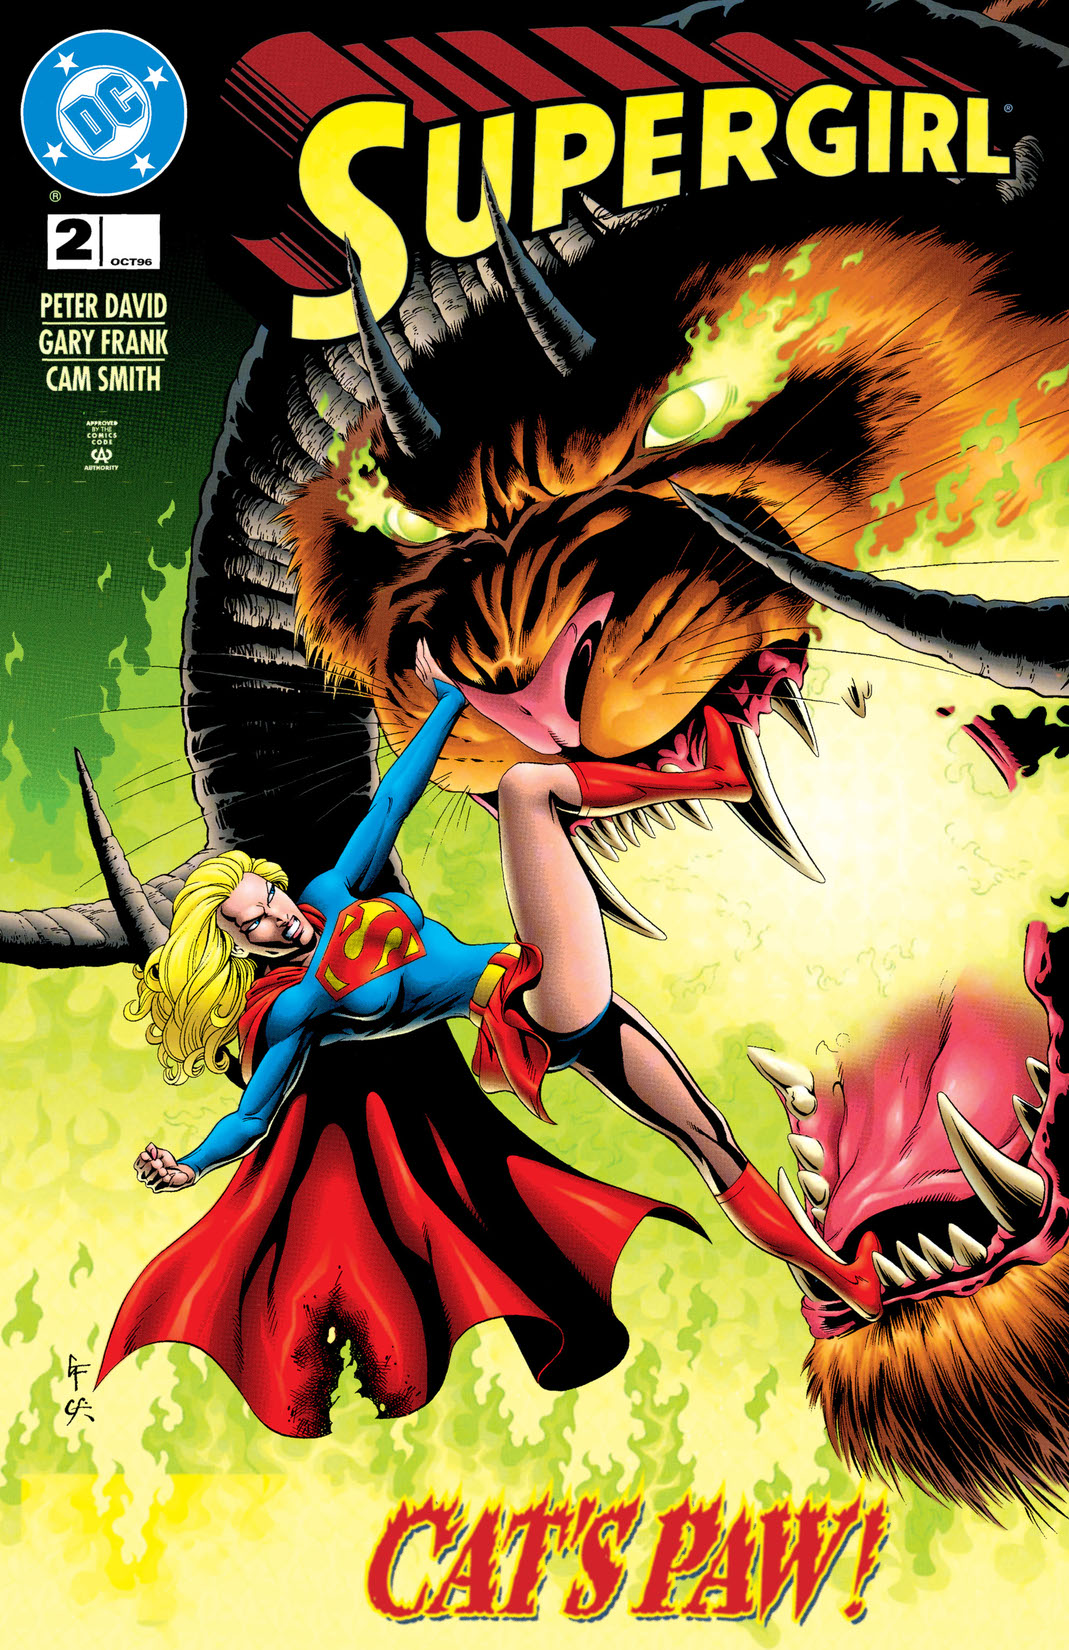 Supergirl (1996-) #2 preview images